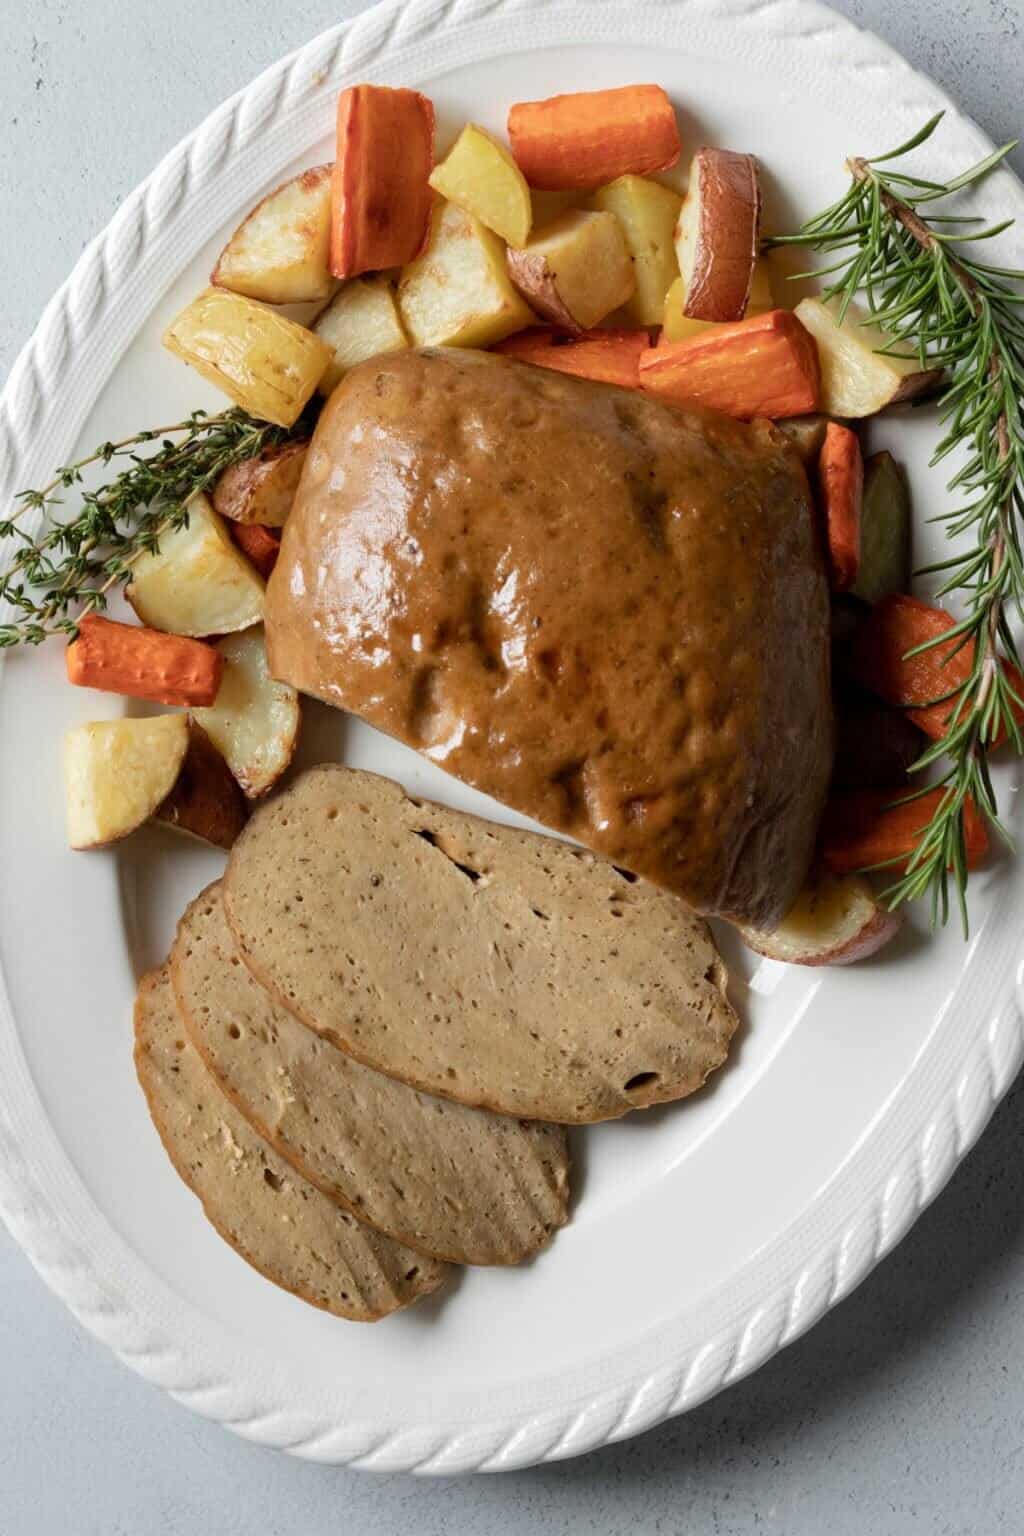 vegan turkey roast on a plate with roasted vegetables and herb garnish